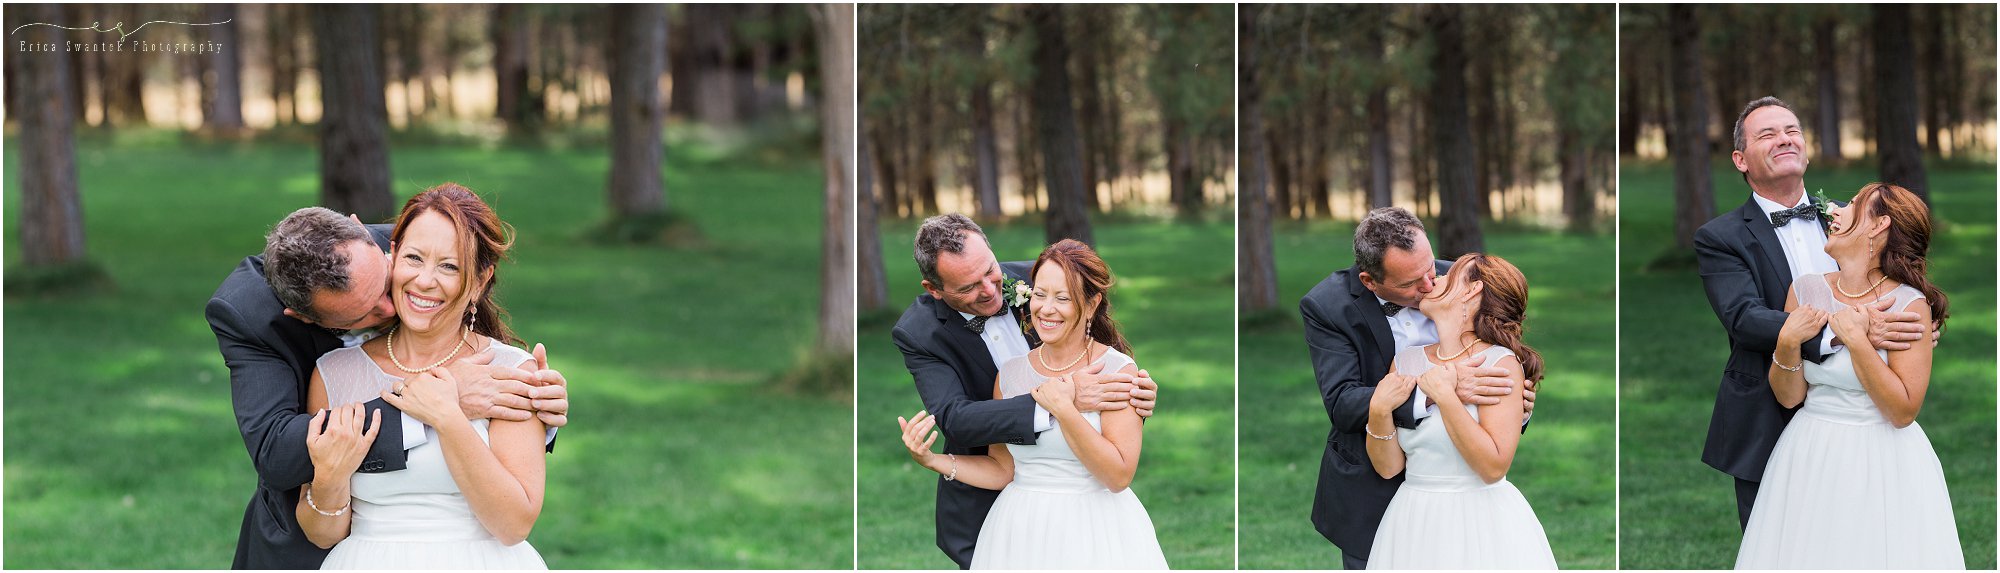 Natural wedding photography for sentimental and free-spirited couples in Bend, Oregon. | Erica Swantek Photography